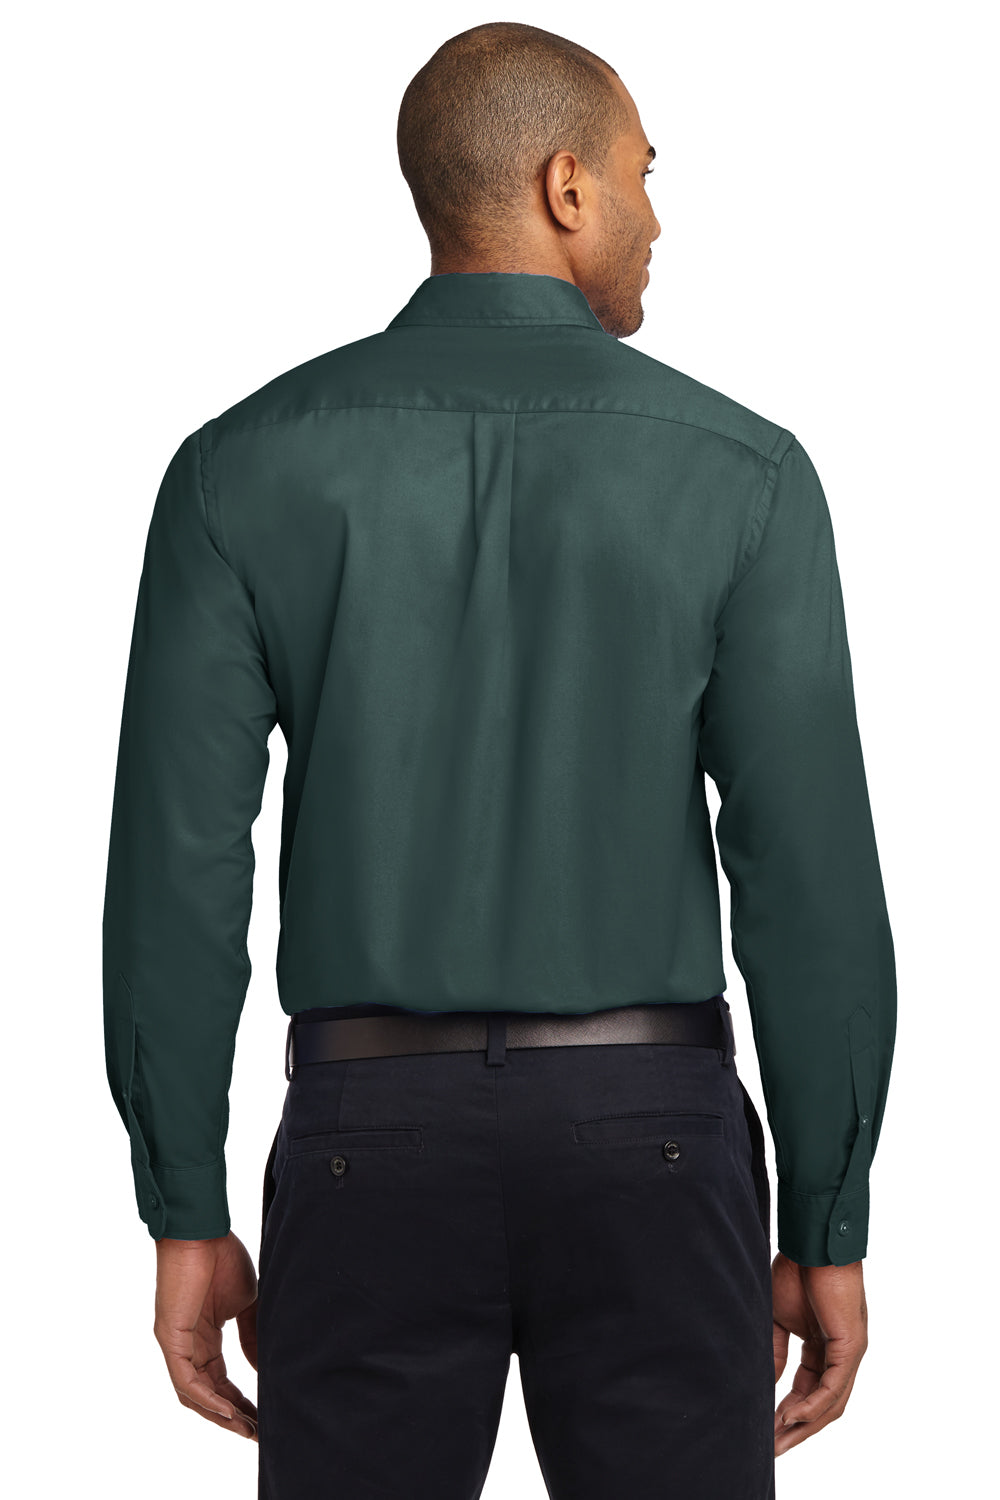 Port Authority S608/TLS608/S608ES Mens Easy Care Wrinkle Resistant Long Sleeve Button Down Shirt w/ Pocket Dark Green Back